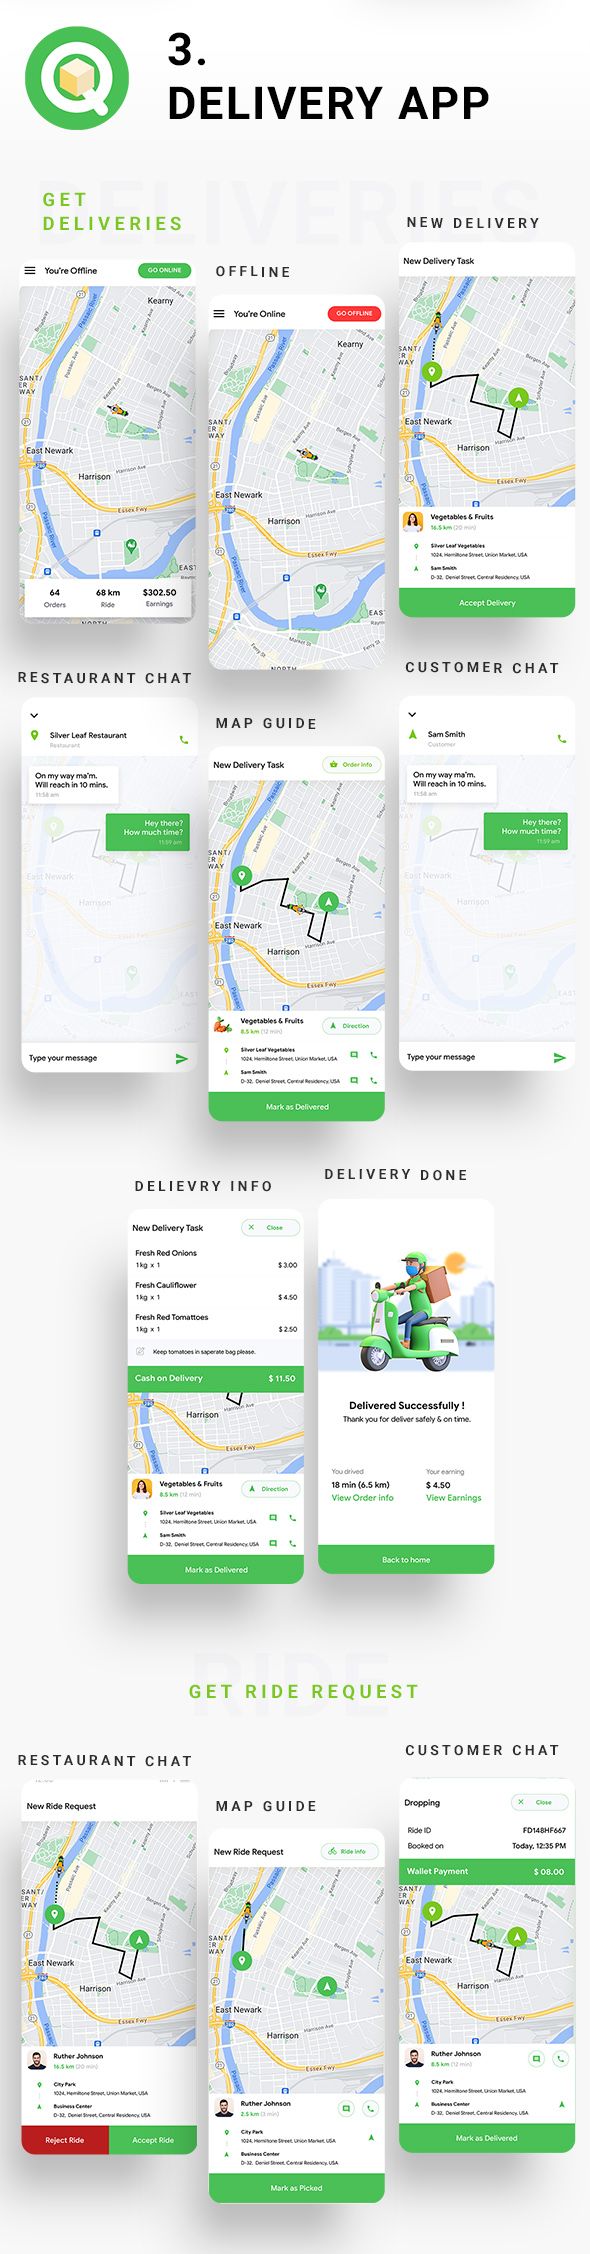 6 App Template| eCommerce Food Grocery Delivery App| Cab Booking| Peer 2 Peer Delivery App| DeliQ - 7